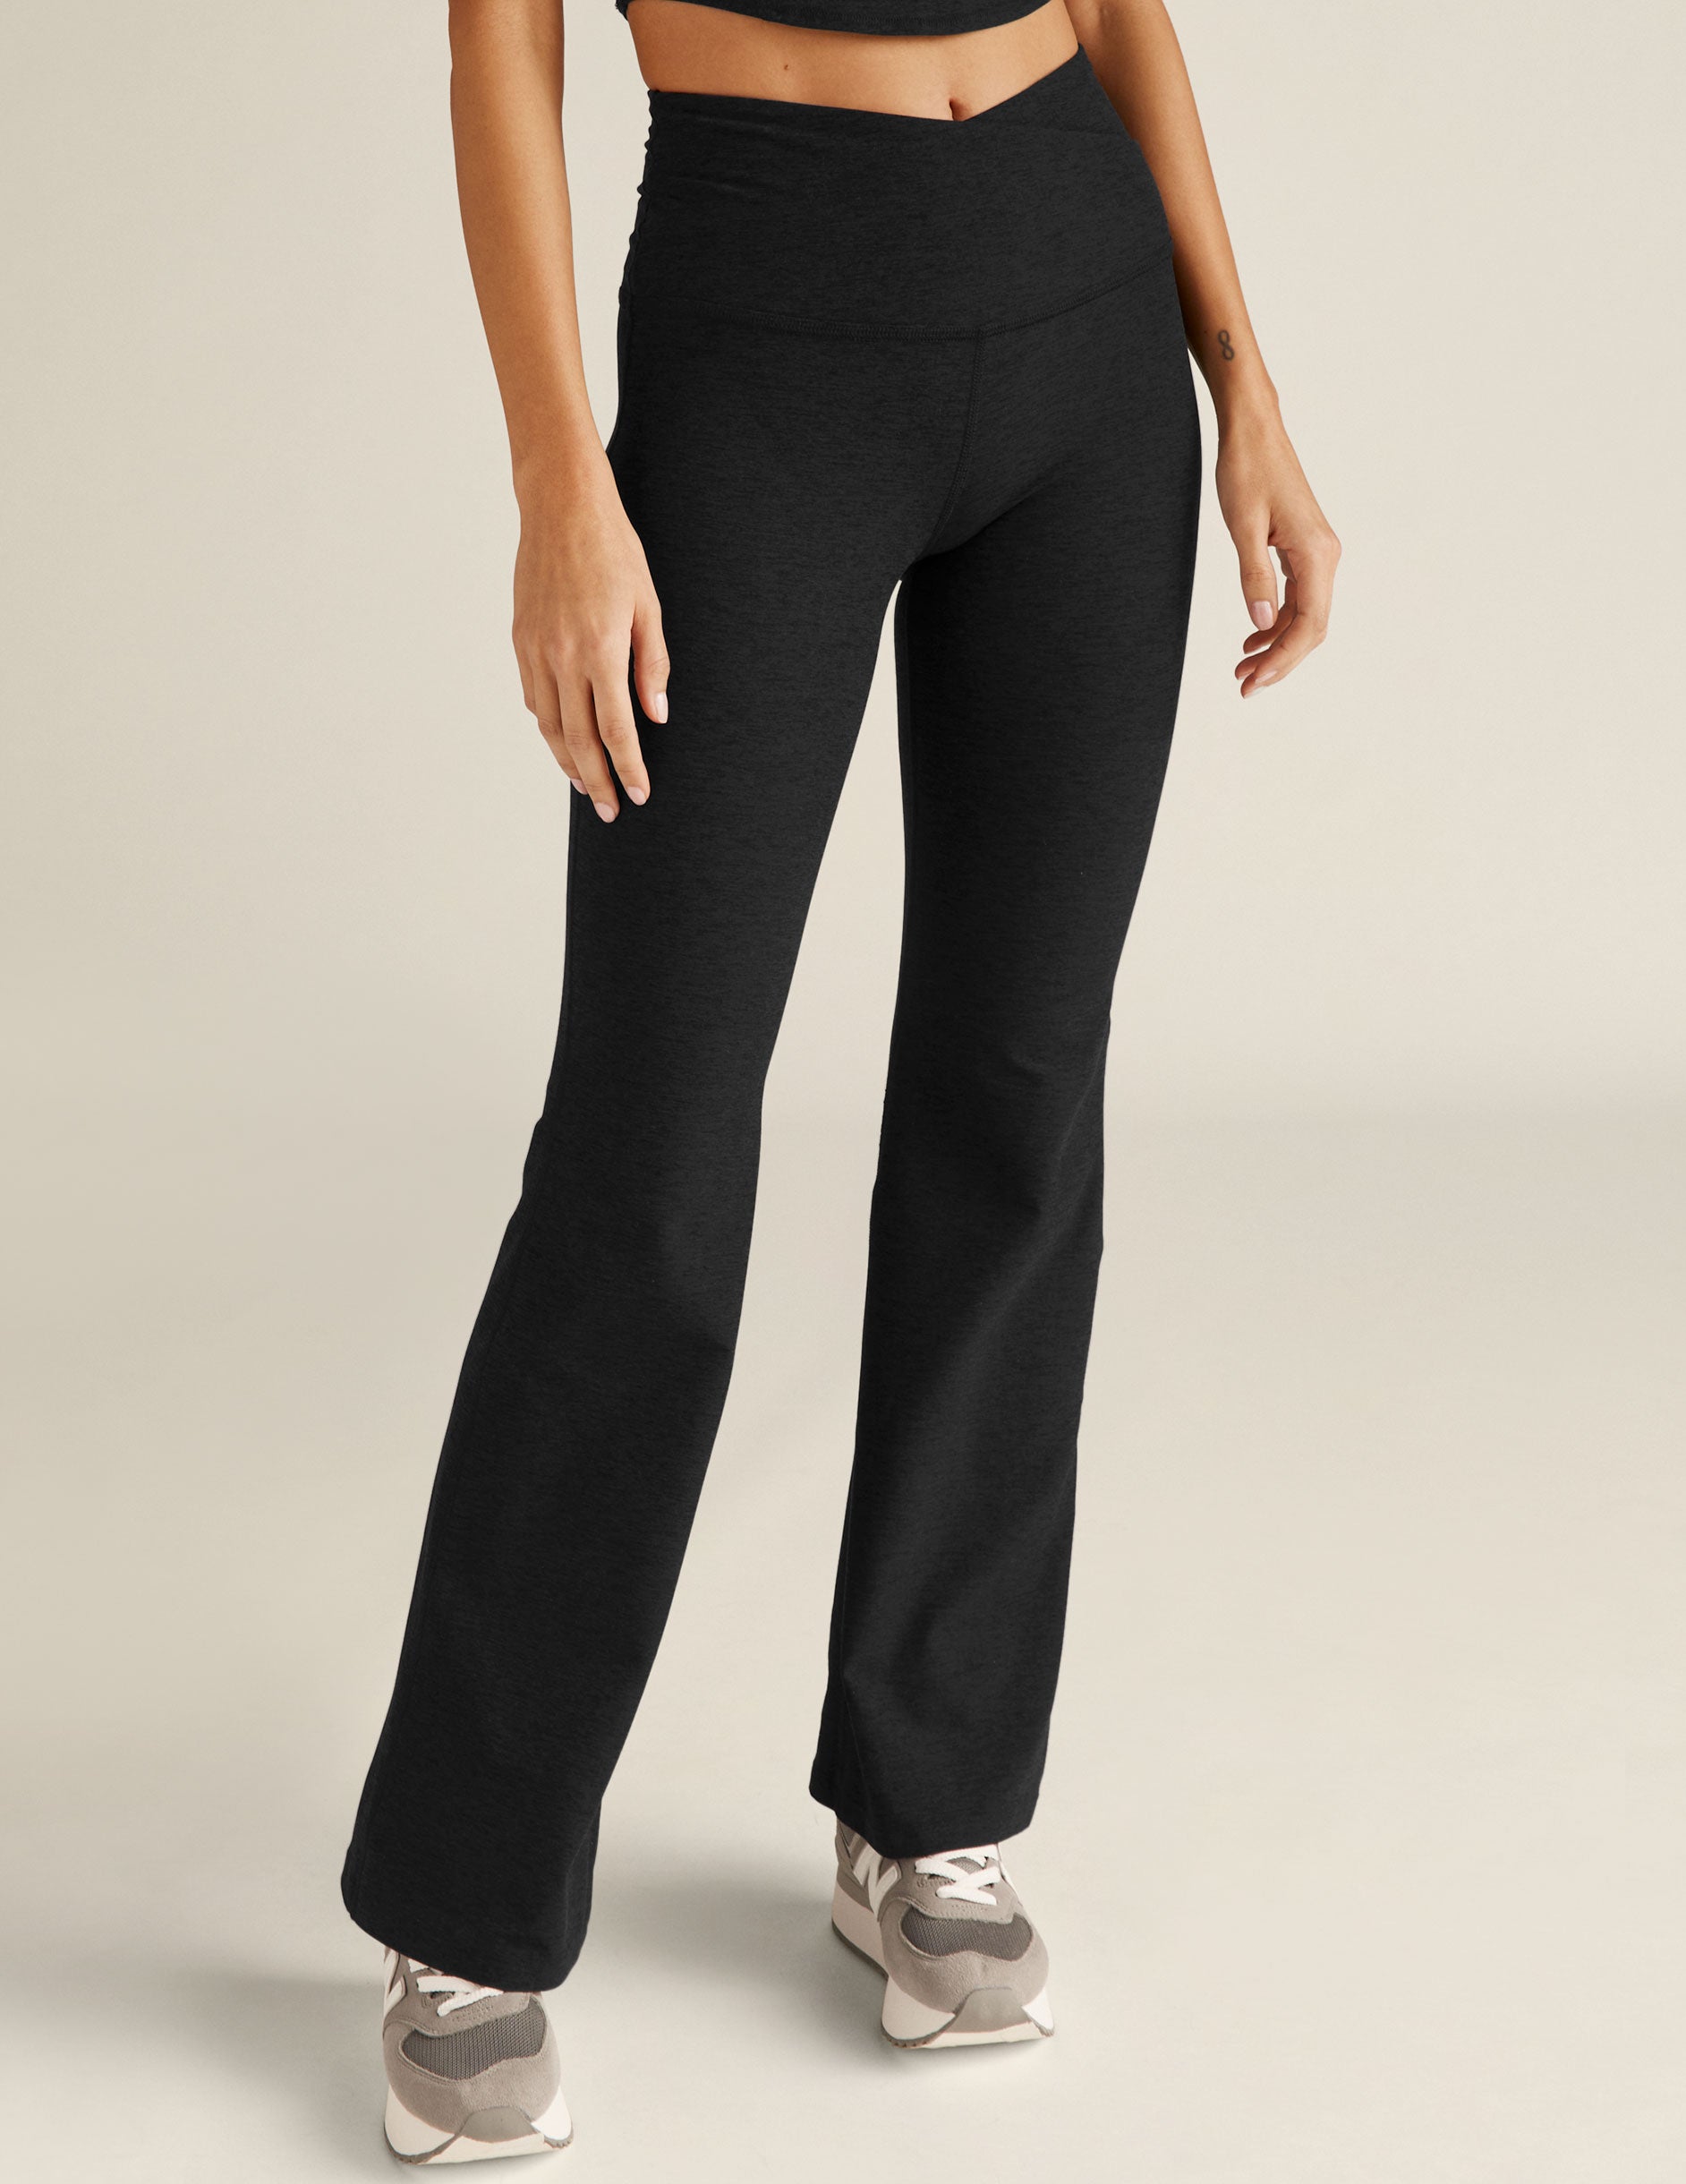 black midi flare pant with criss cross front detail